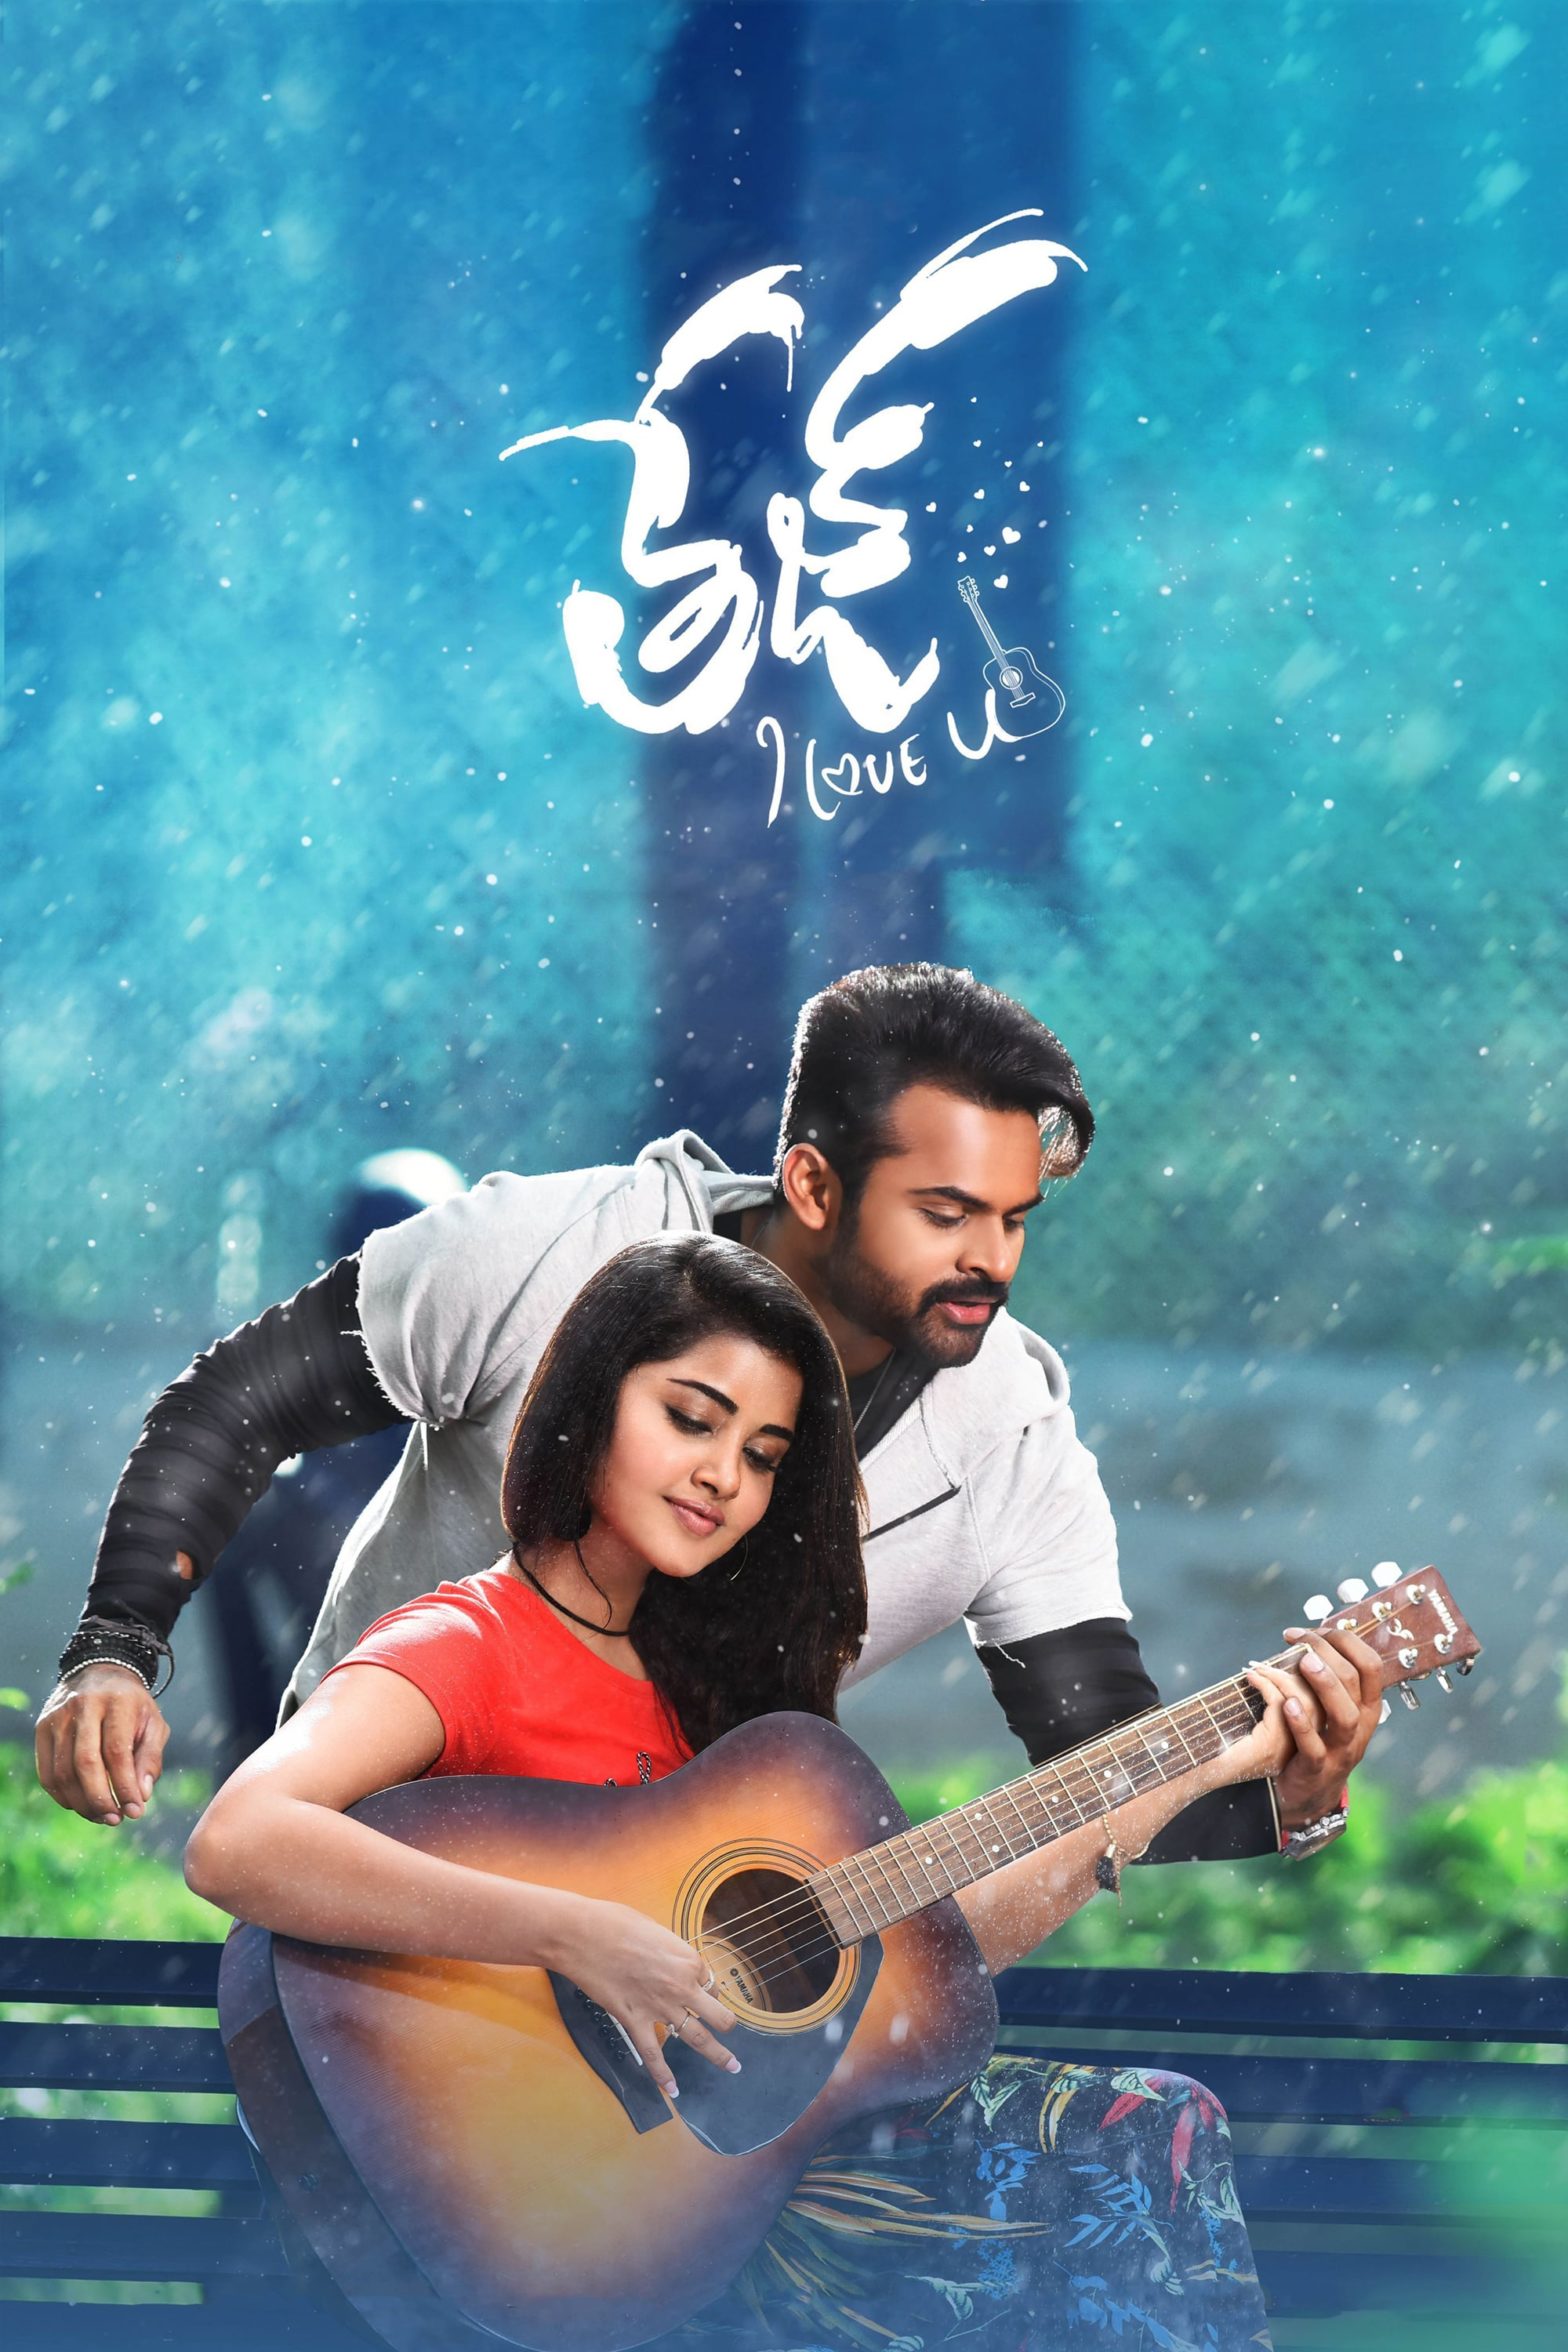 Poster for the movie "Tej... I Love You"